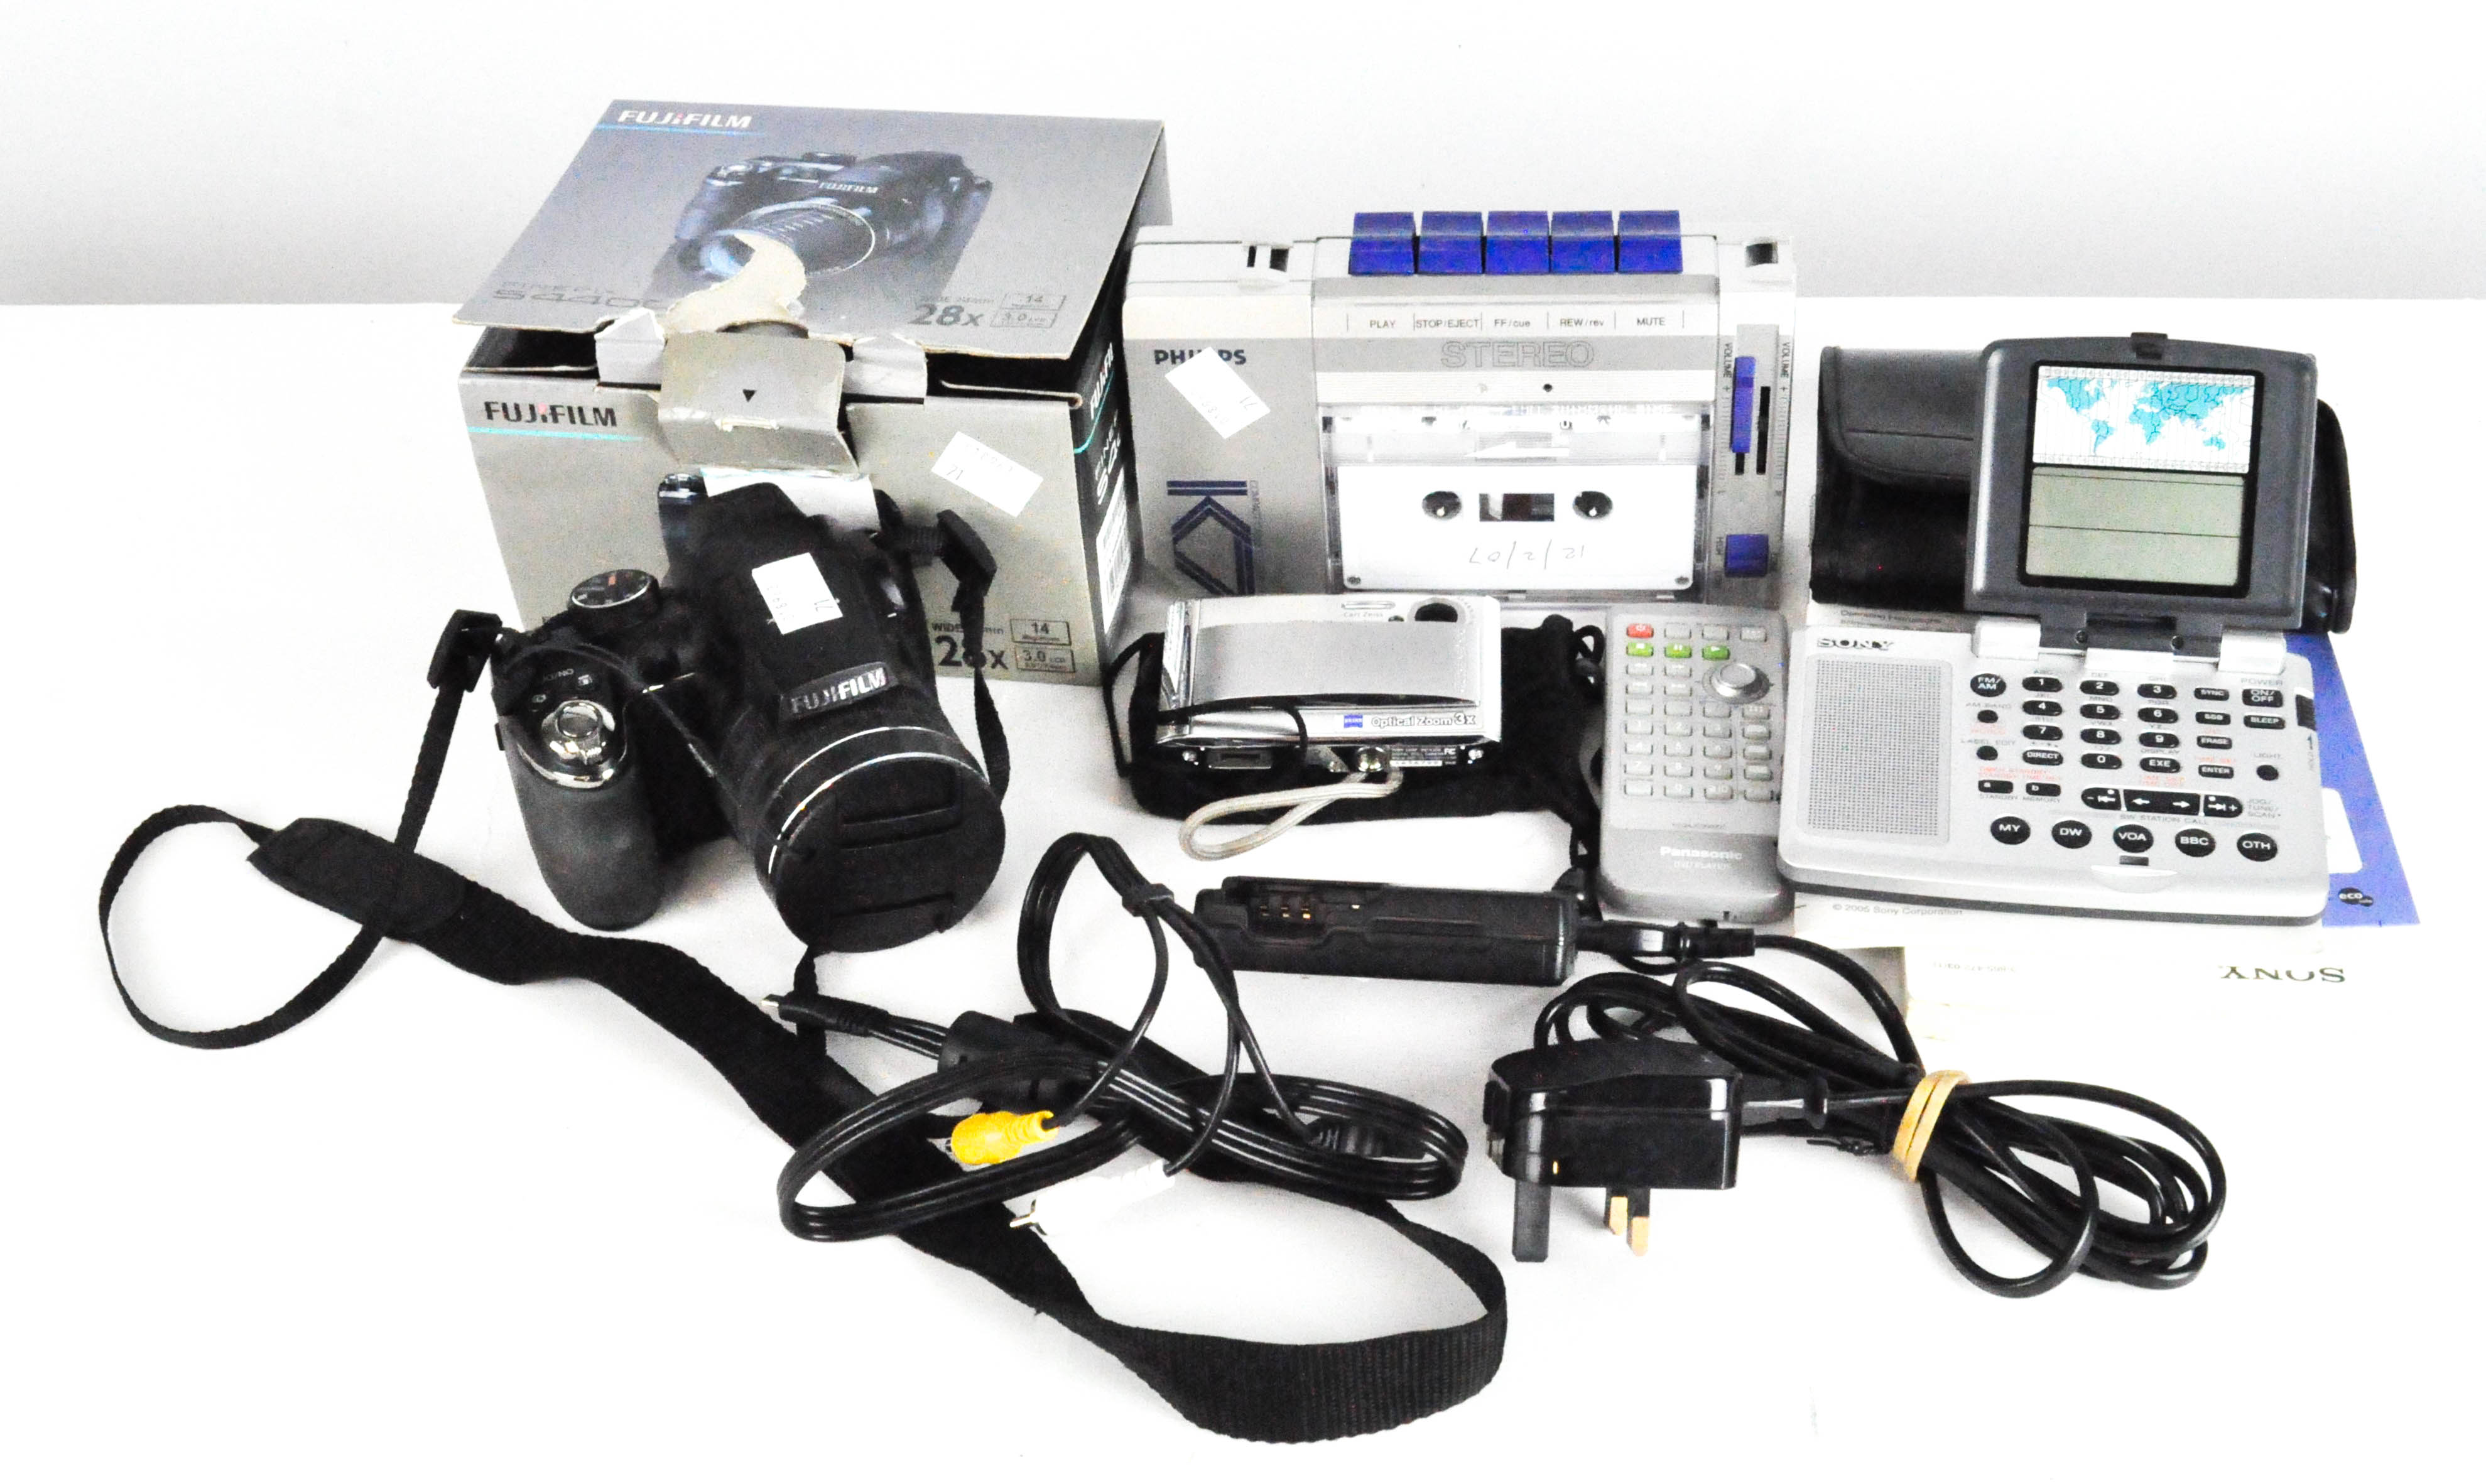 A Fujifilm s4400 digital camera together with a Philips compact cassette player and other items